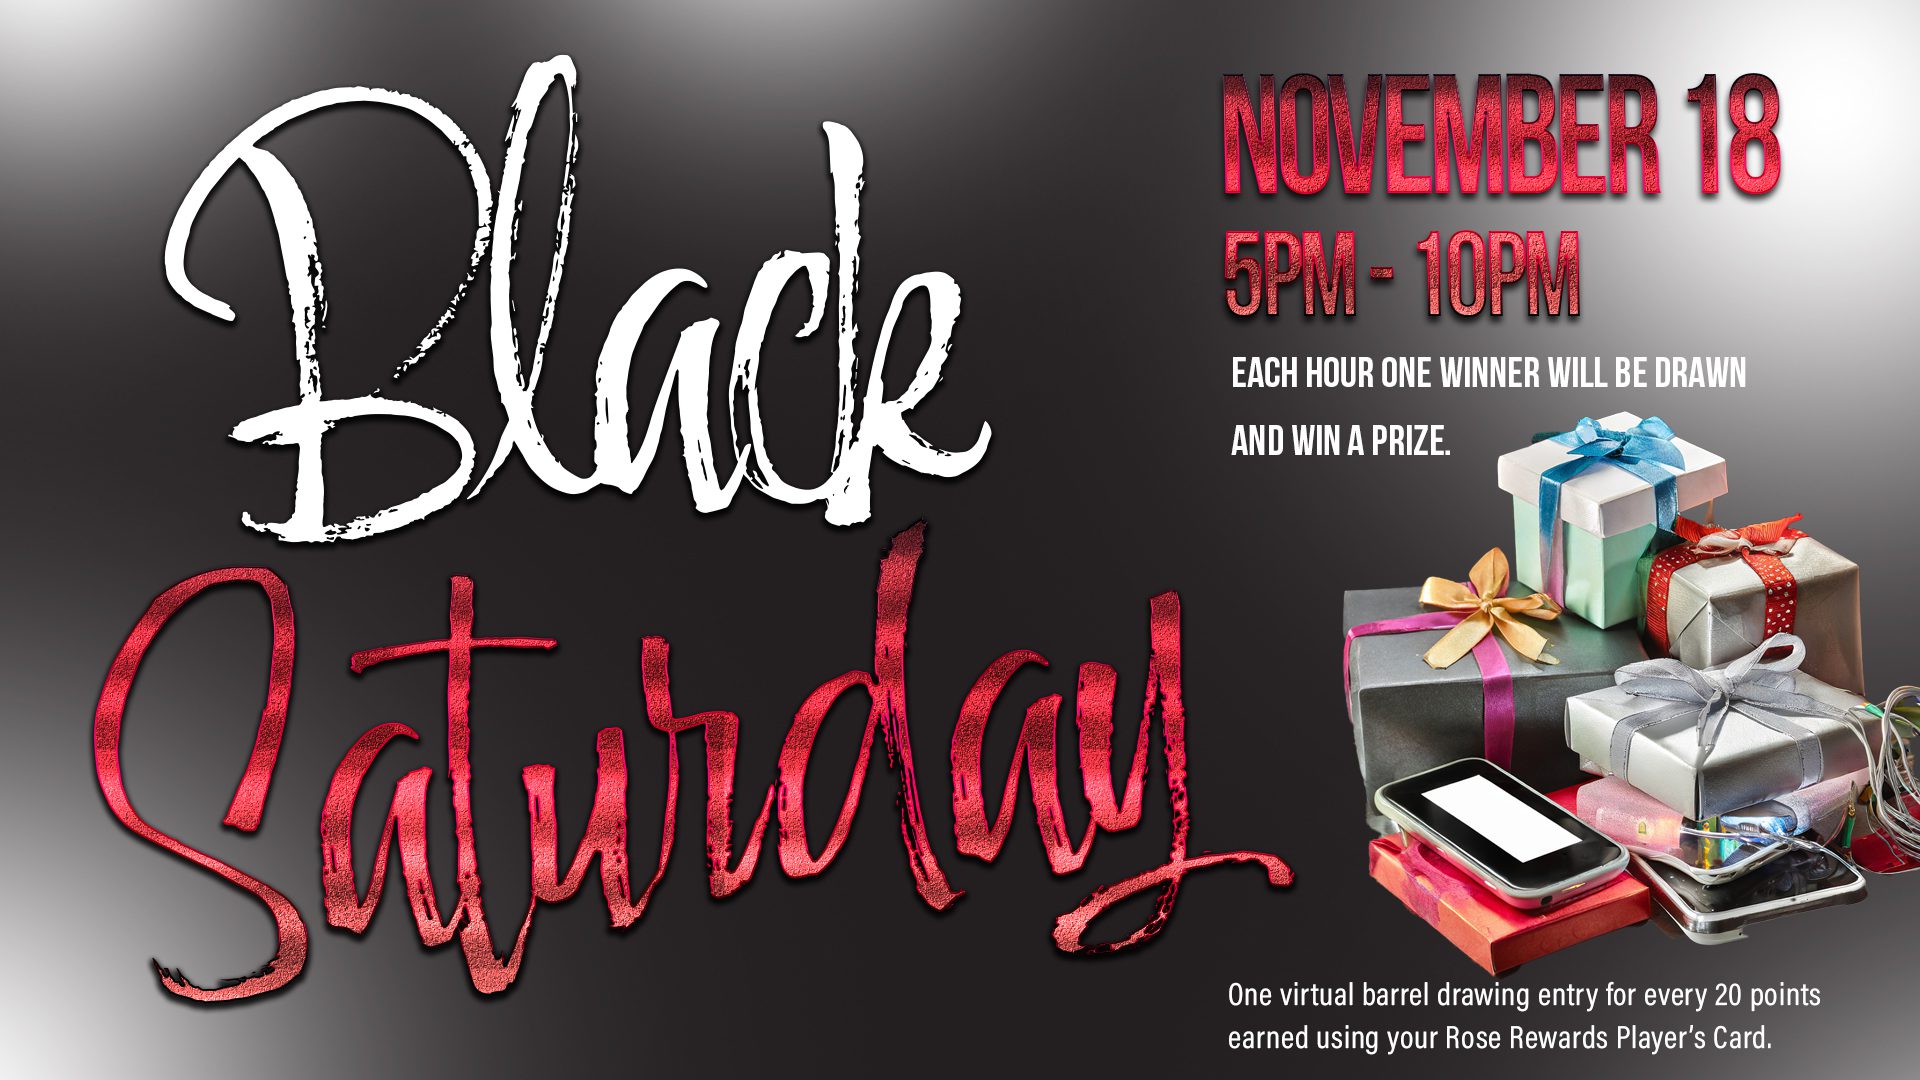 A black saturday event with a red and white lettering.